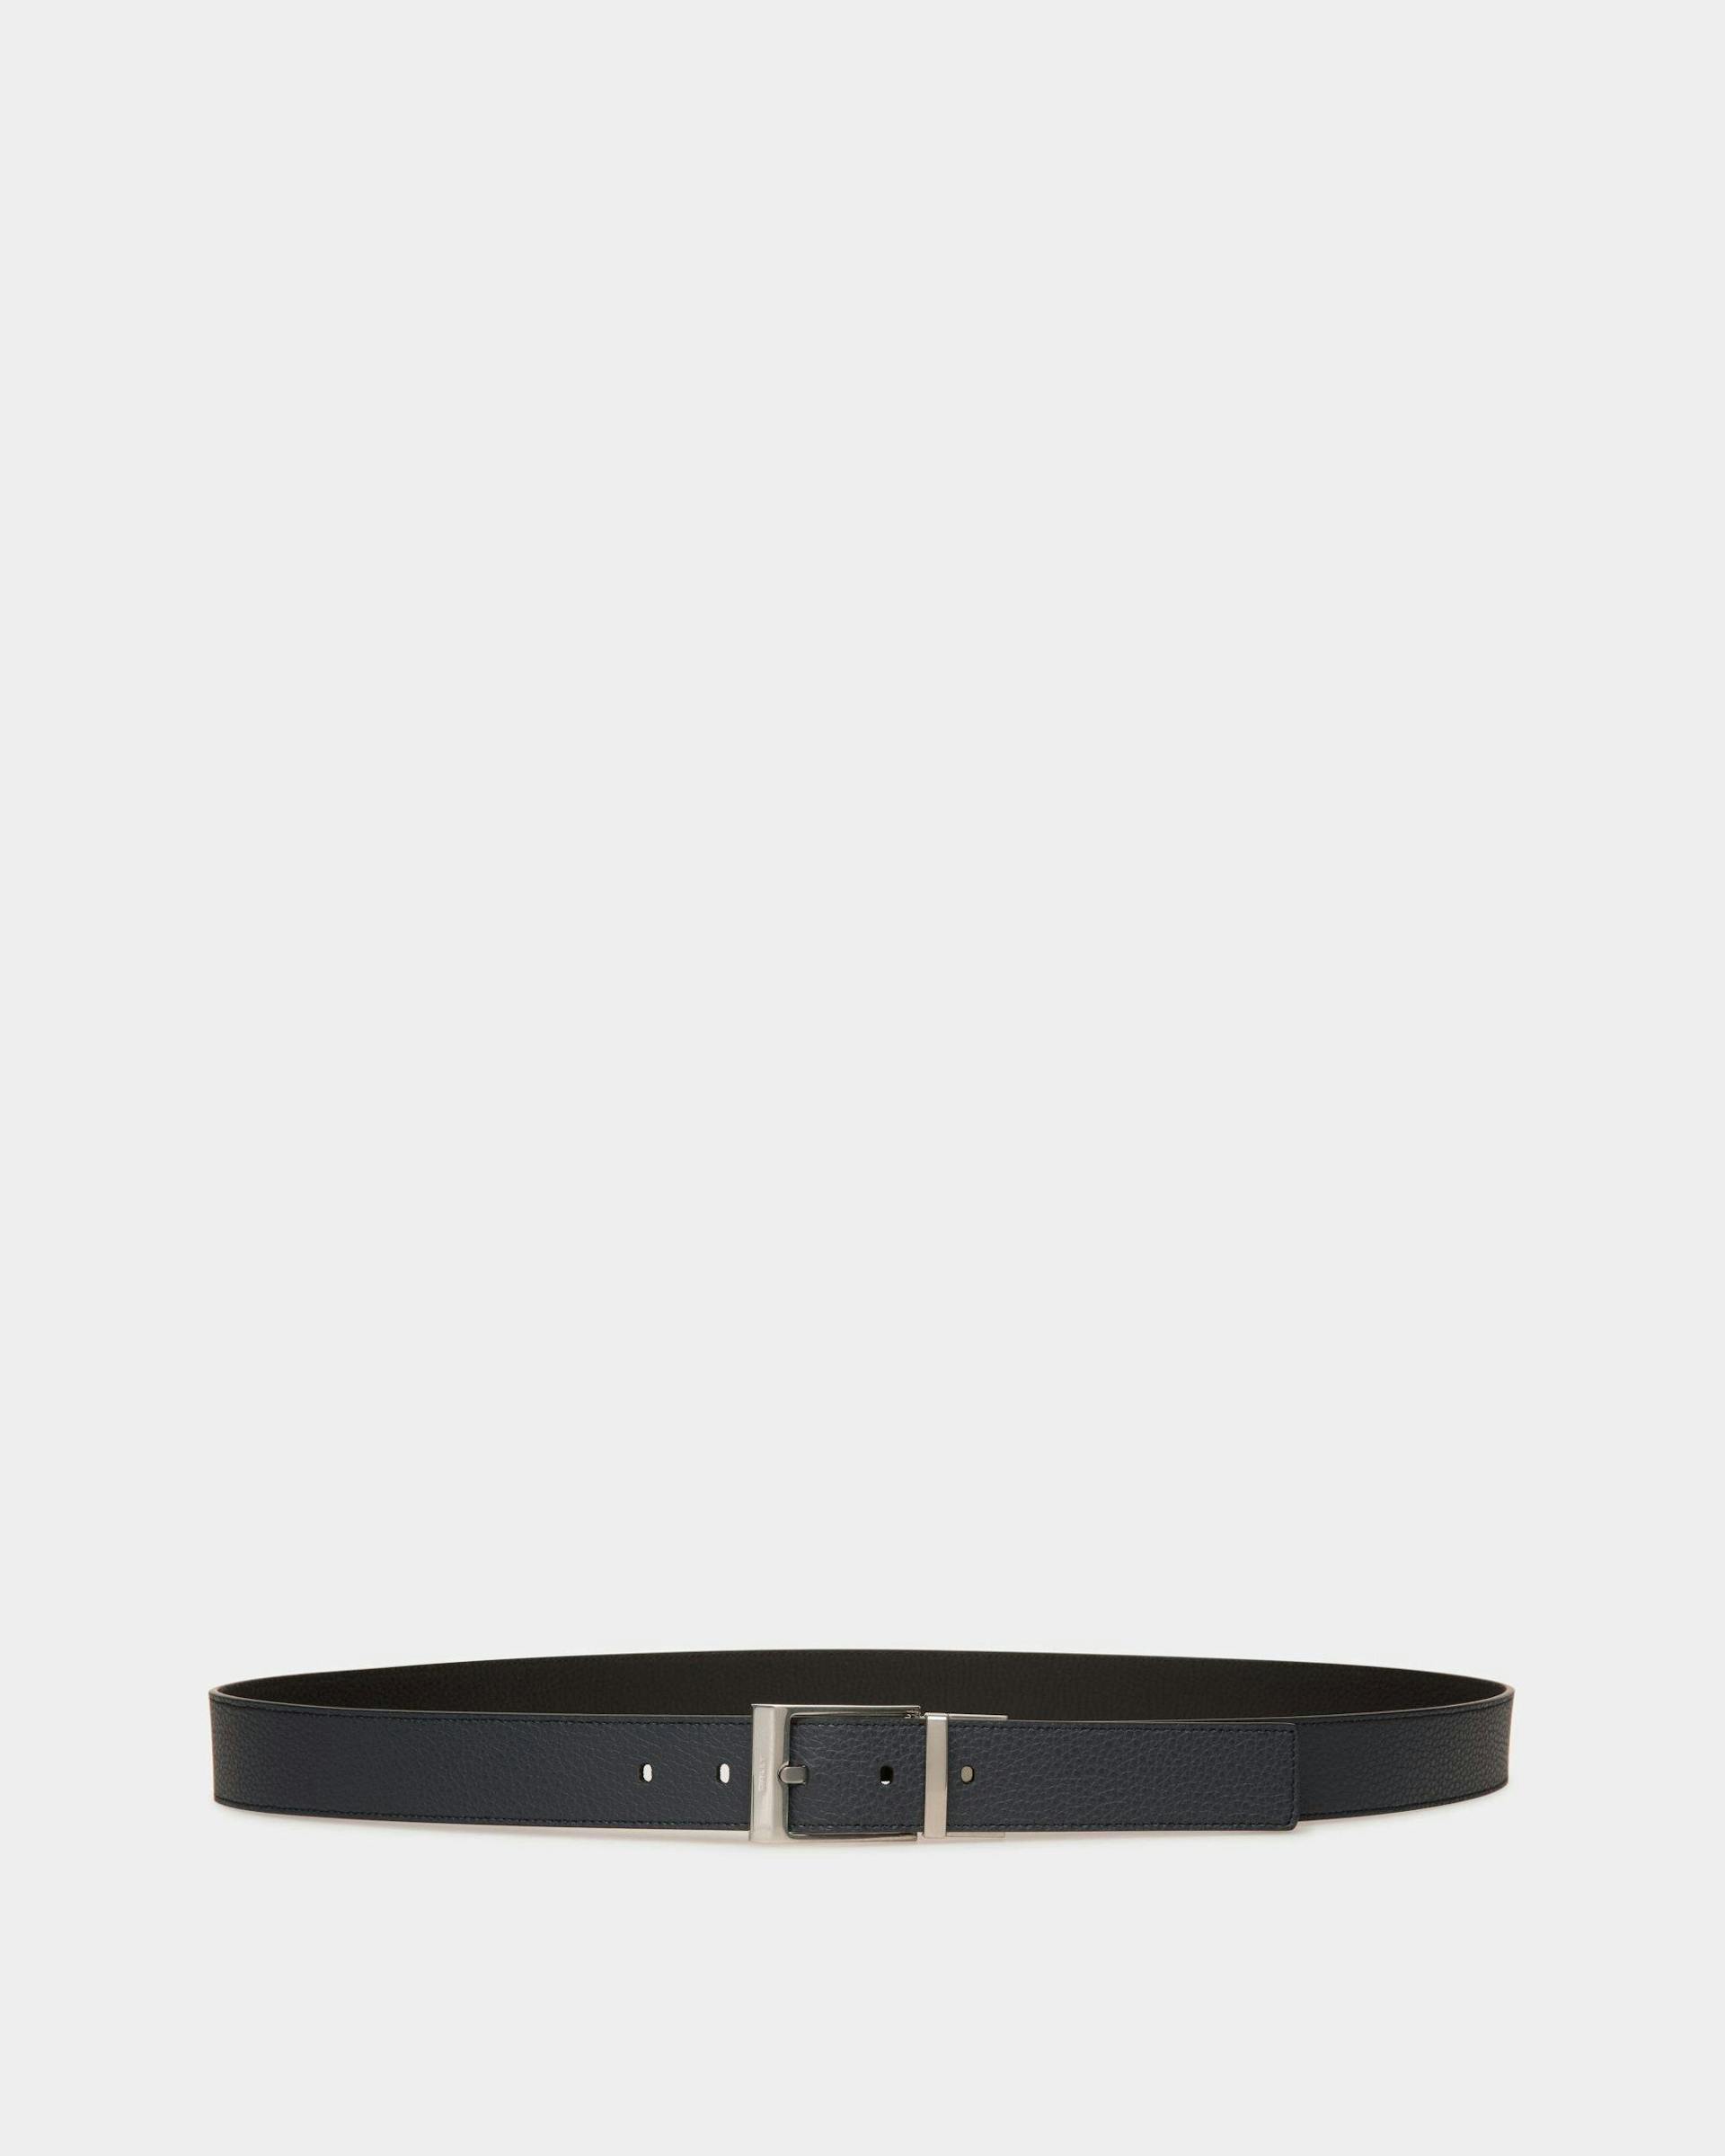 Men's Dress Belt In Midnight And Black Leather | Bally | Still Life Front